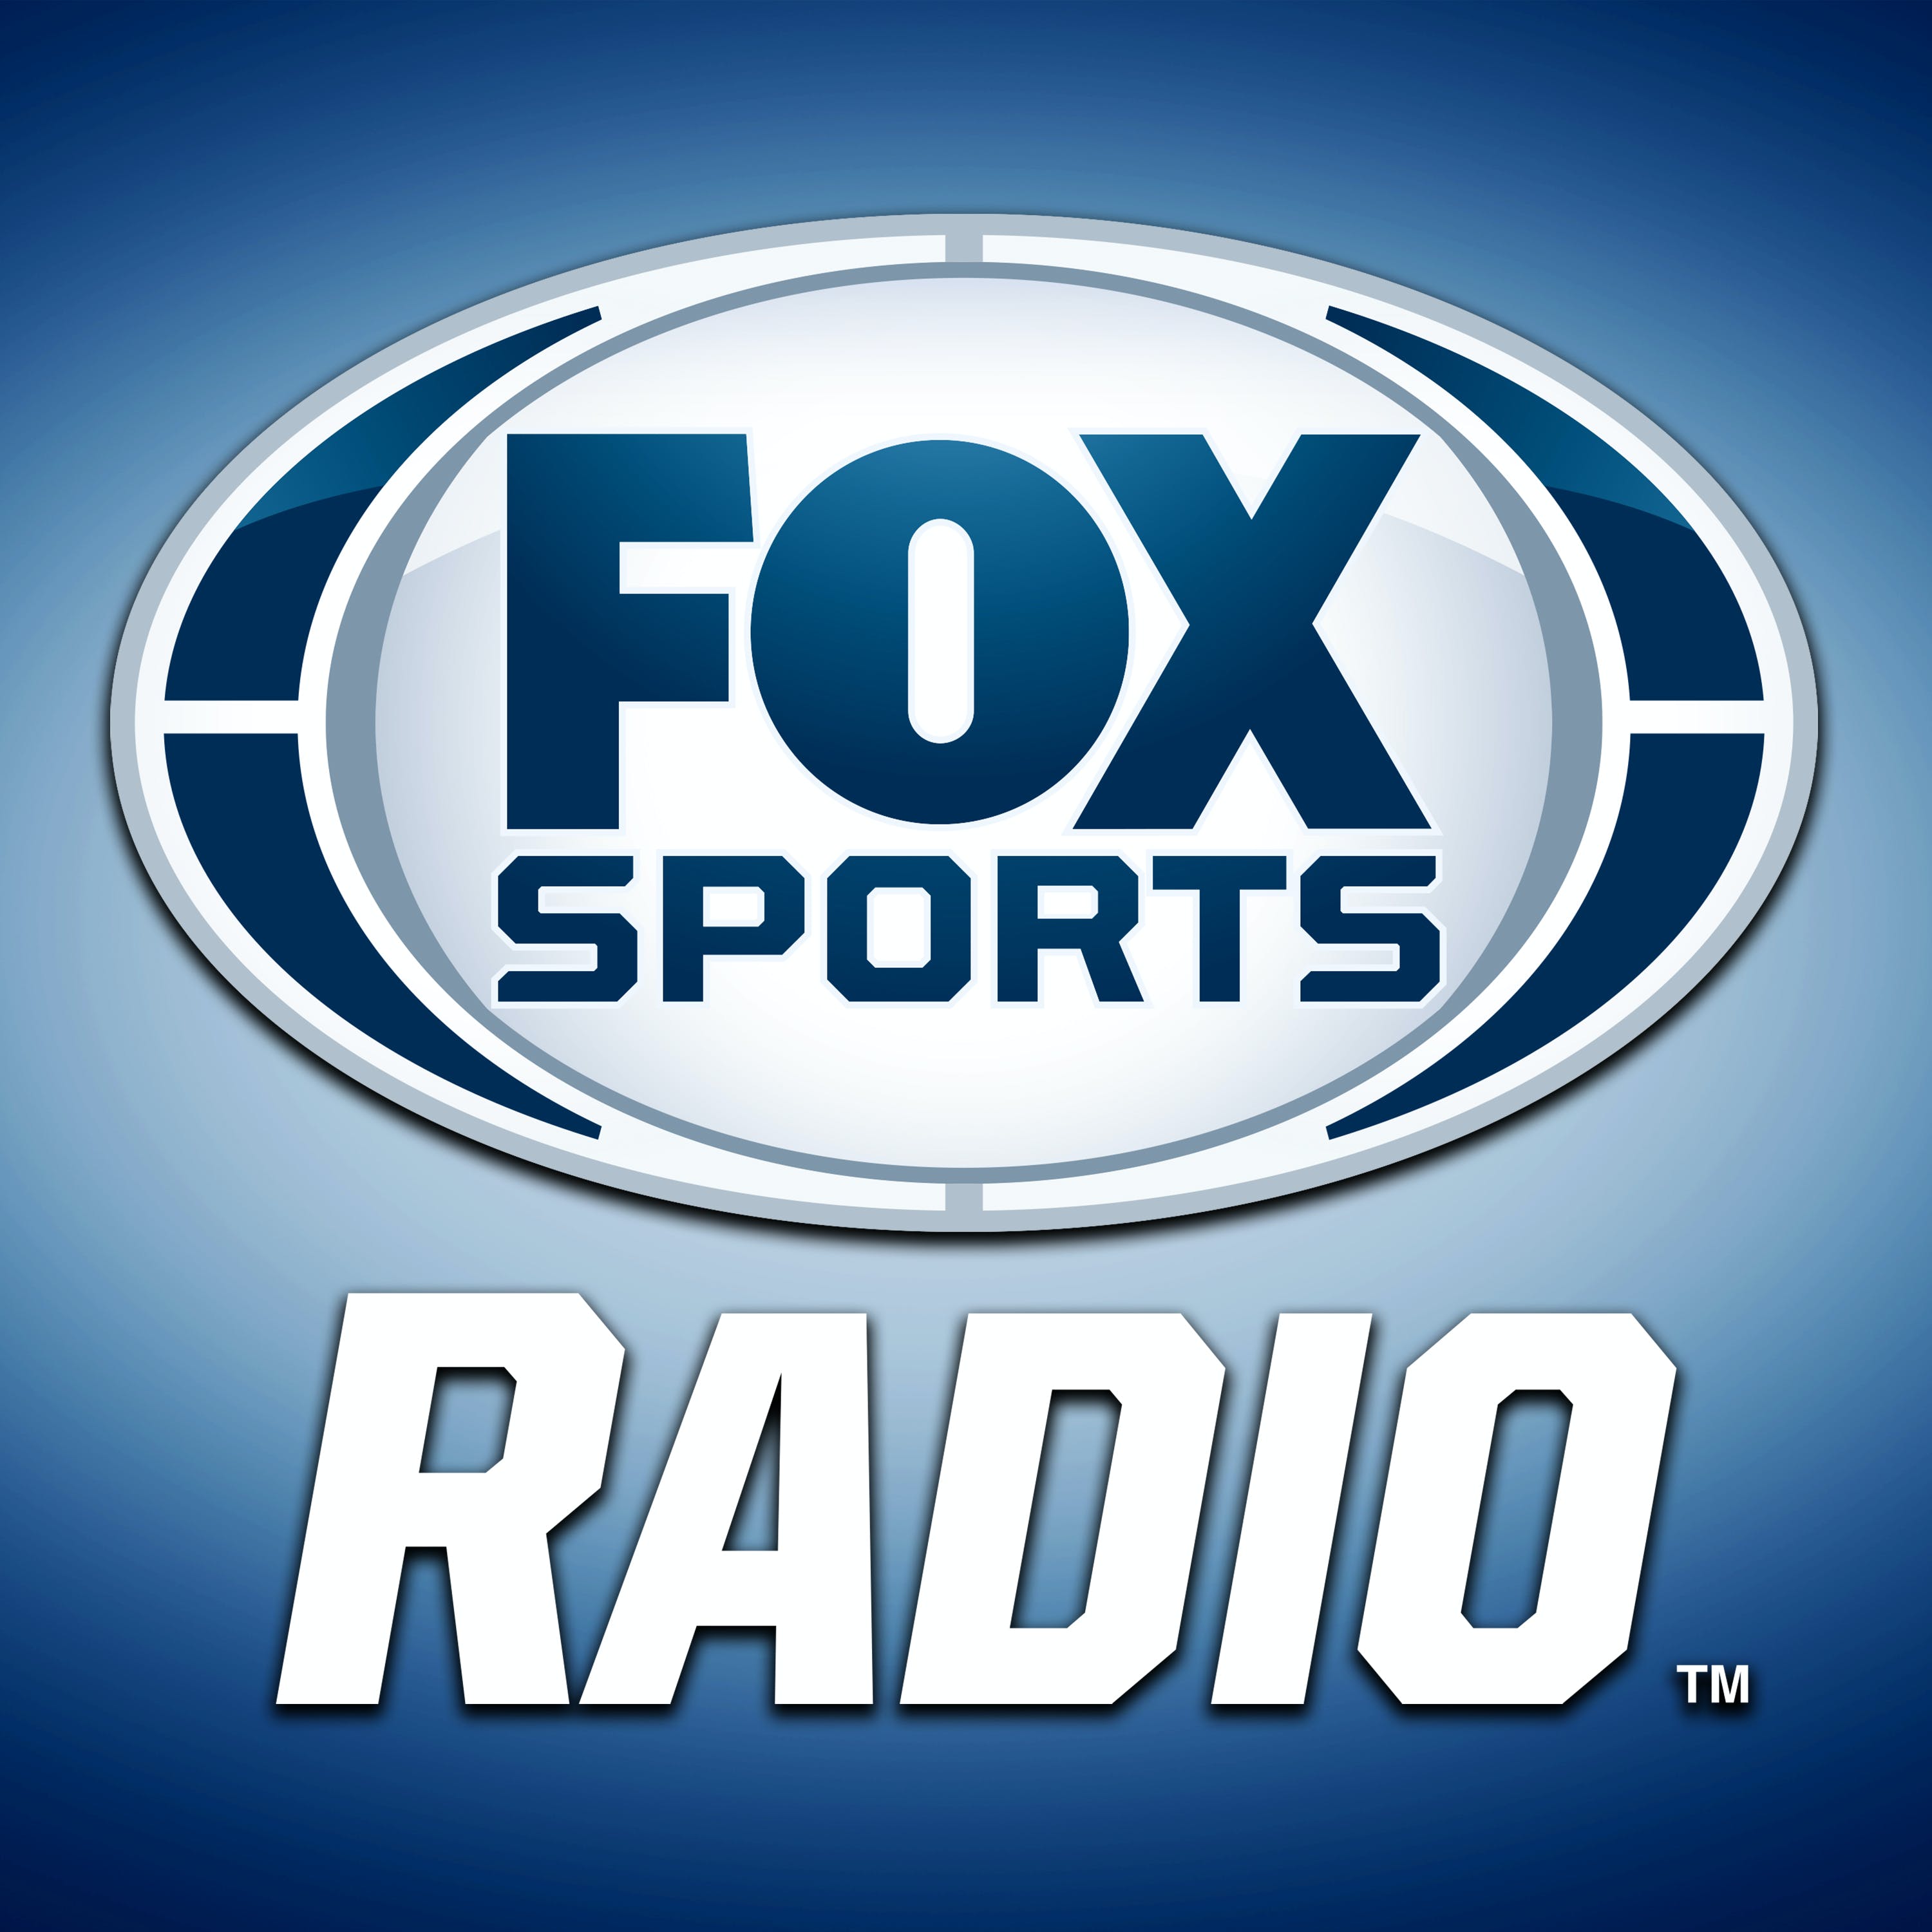 01/23/2021 - FOX Football Saturday with Arnie Spanier and Aaron Torres - Championship Weekend